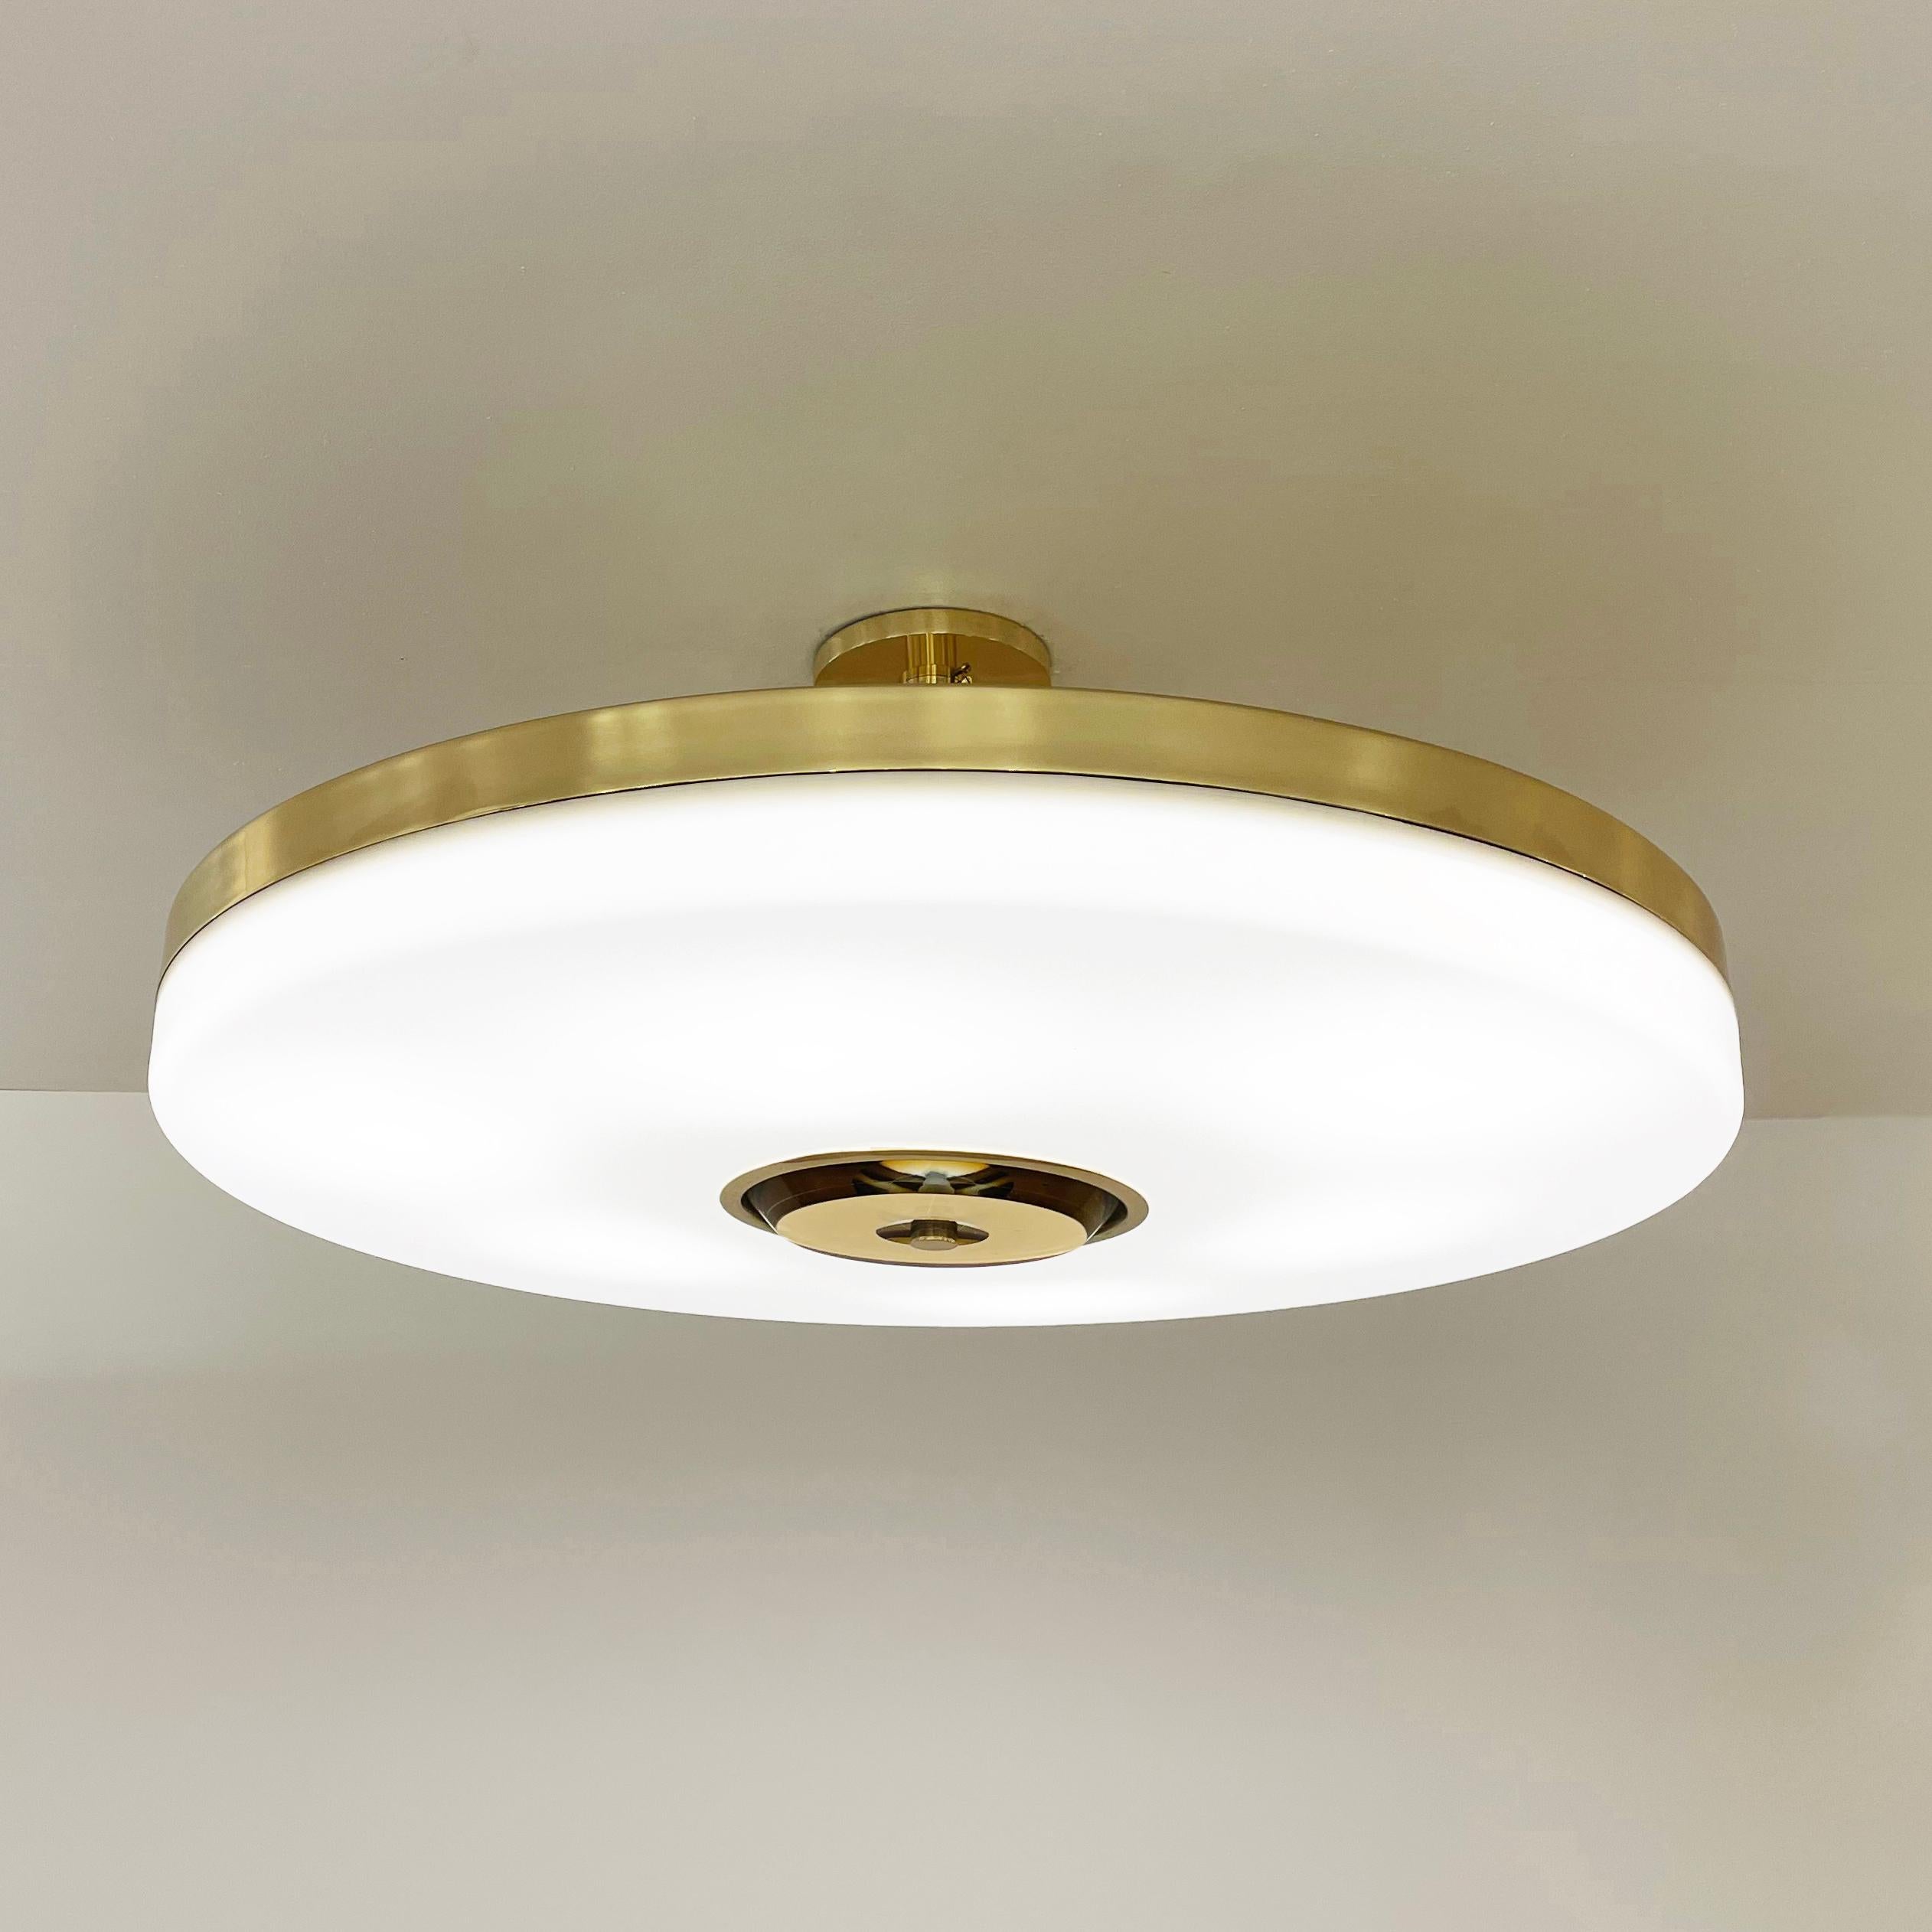 Iris Grande Ceiling Light by Gaspare Asaro-Bronze Finish In New Condition For Sale In New York, NY